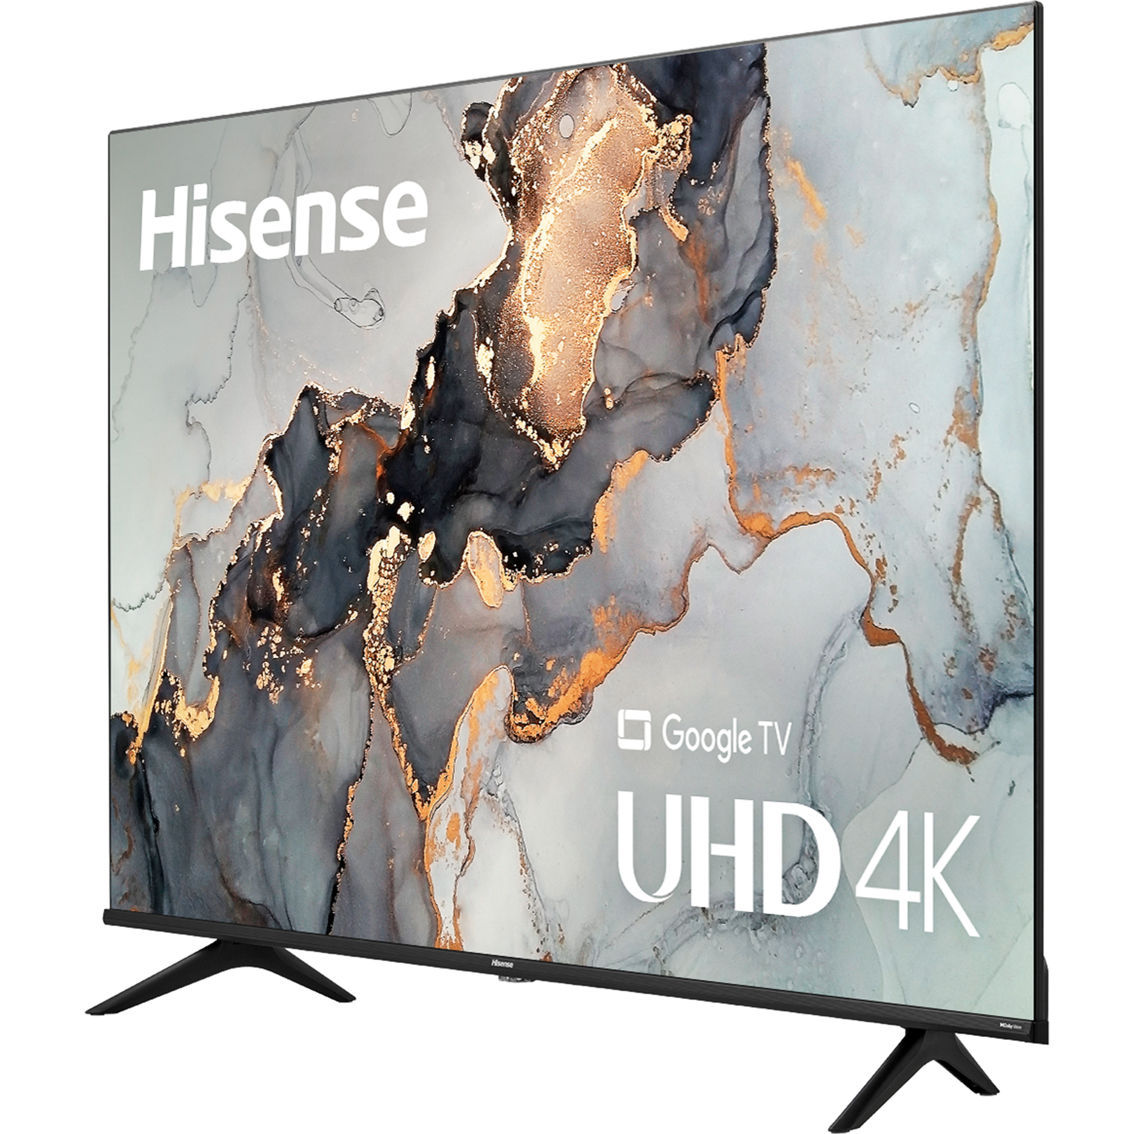 Hisense 55 in. 4K Ultra HD Google TV with Game Mode Plus and Google Assistant - Image 2 of 3